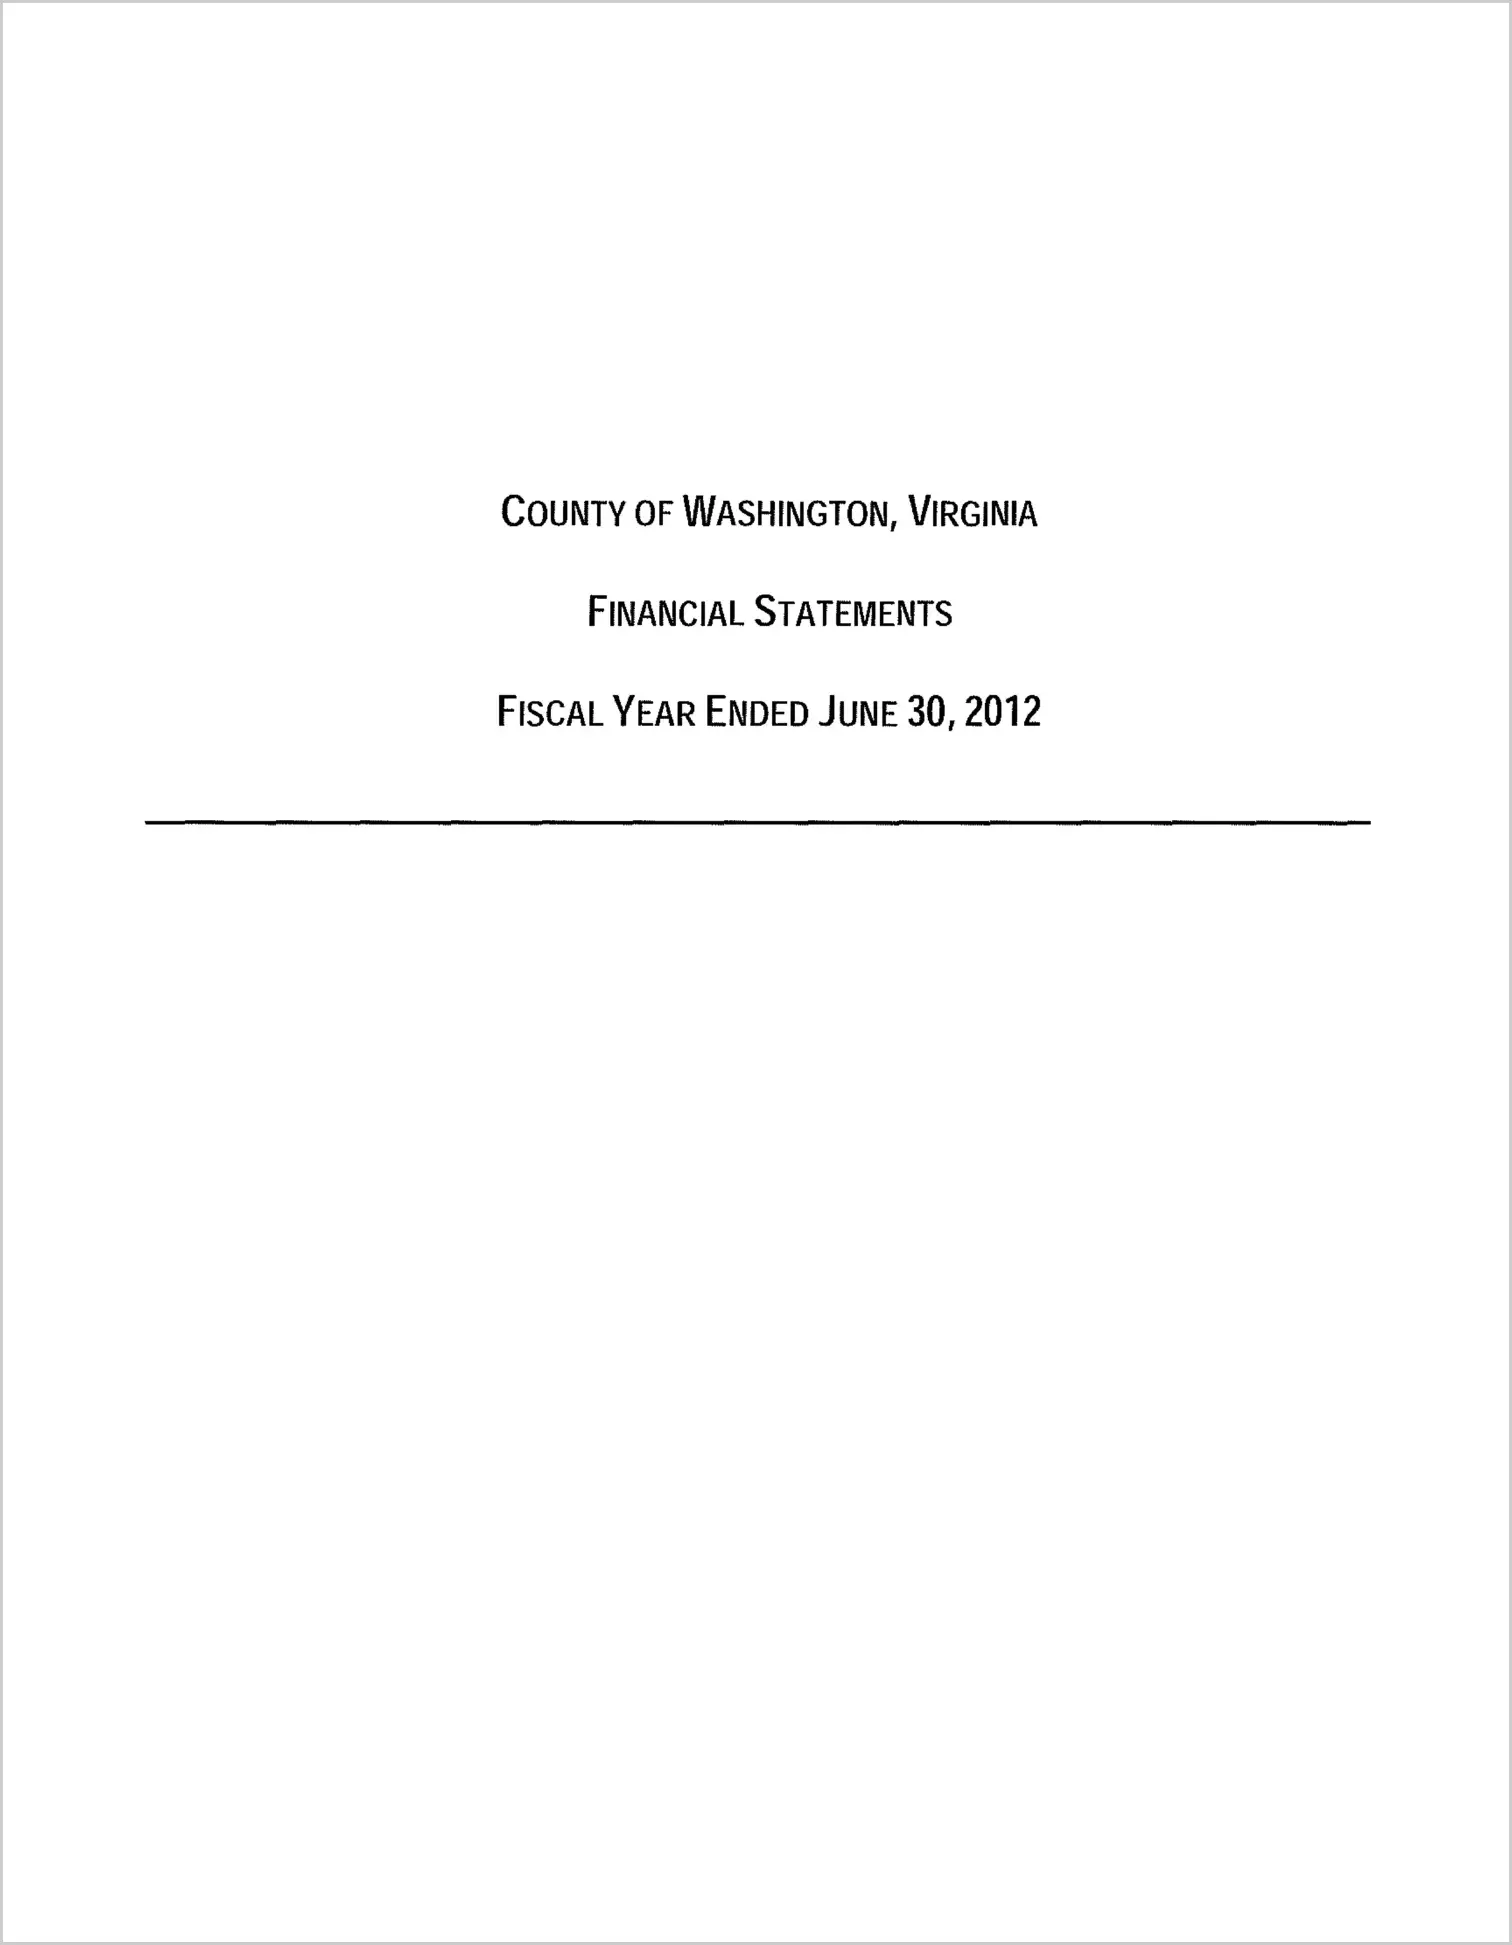 2012 Annual Financial Report for County of Washington